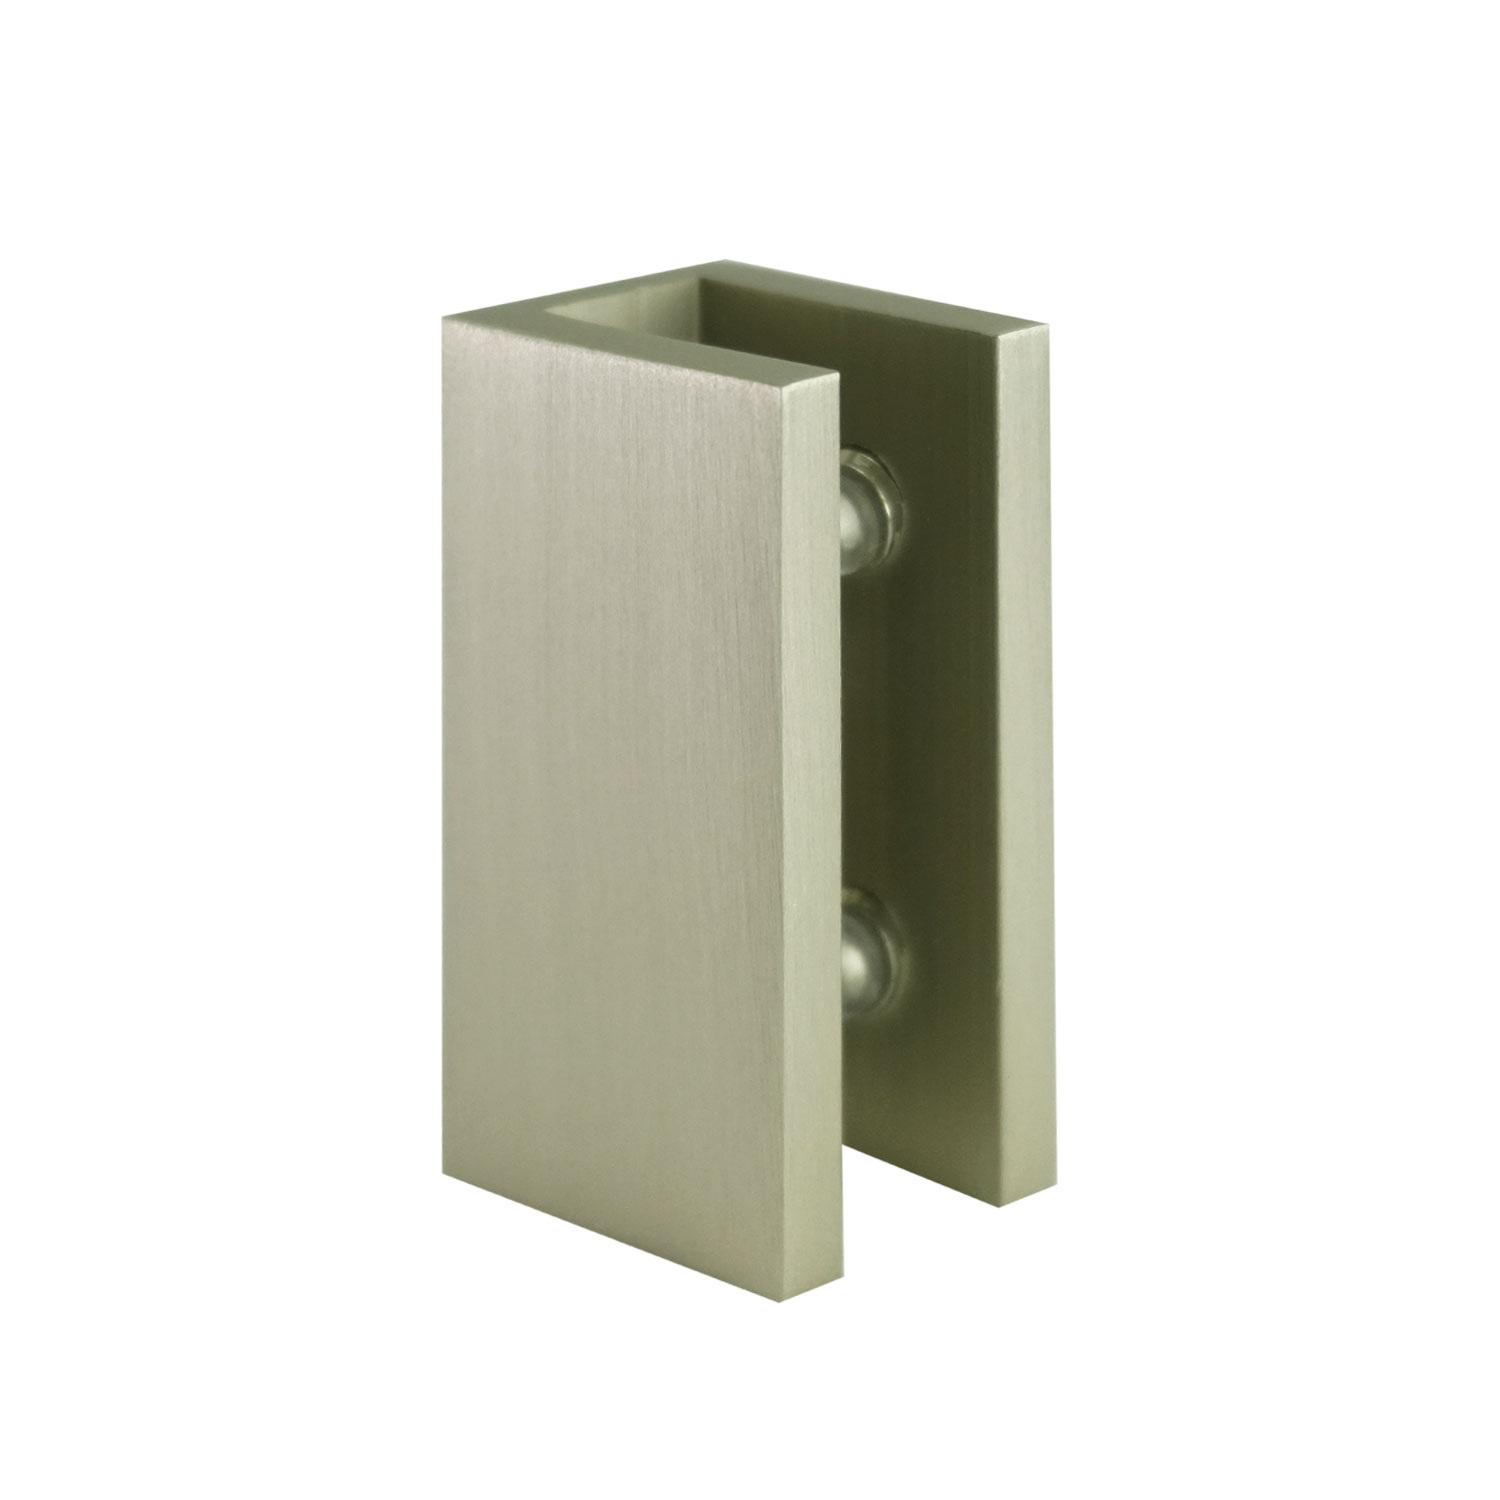 GLASS TO WALL U-CLAMP 25MM X 50MM - SQUARE SERIES - (BRUSHED NICKEL)